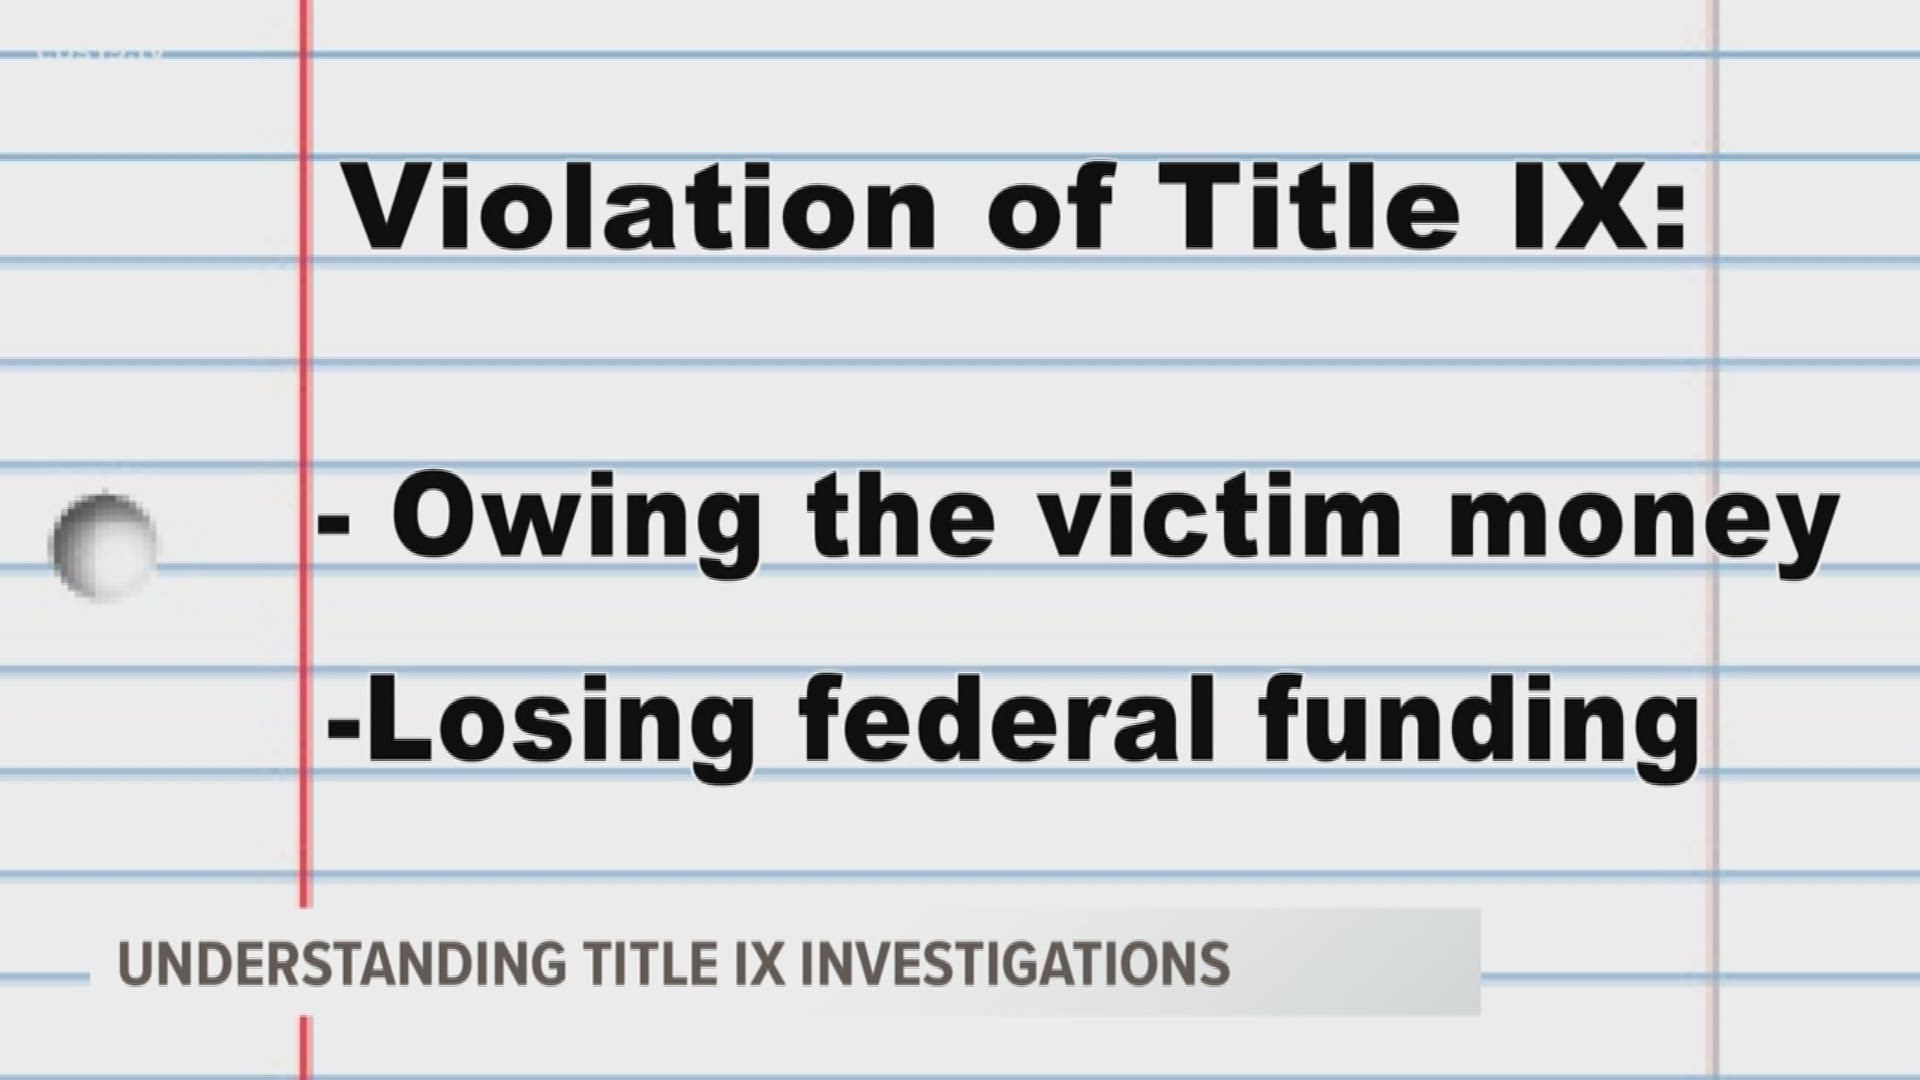 What is a Title IX violation?